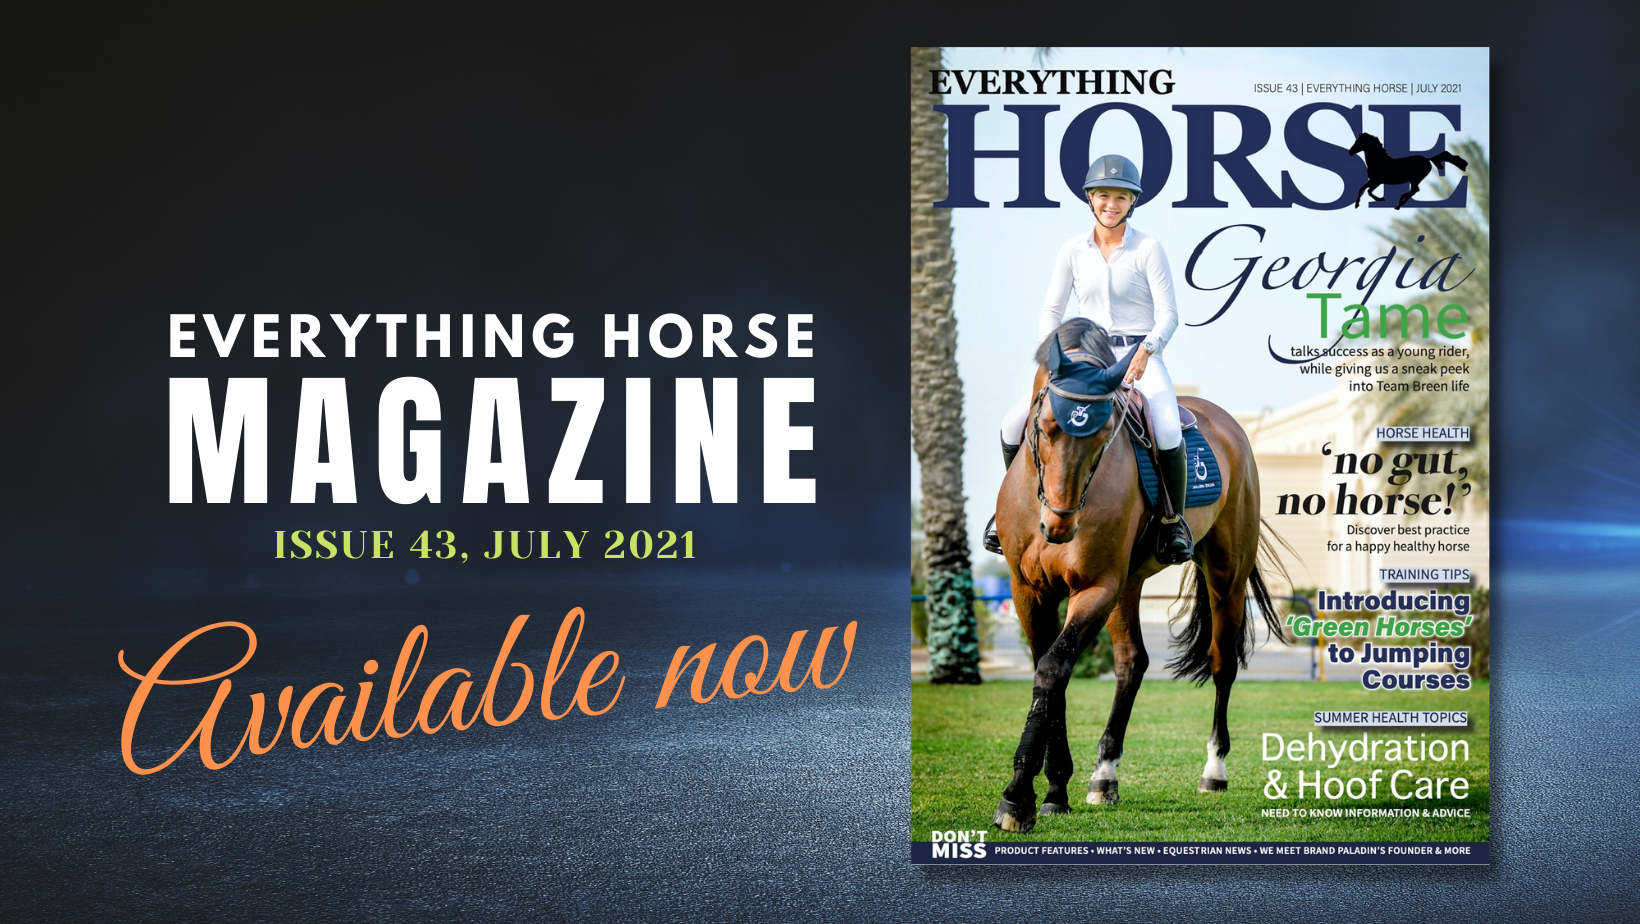 Everything Horse Magazine, July 2021 Issue 43 available now